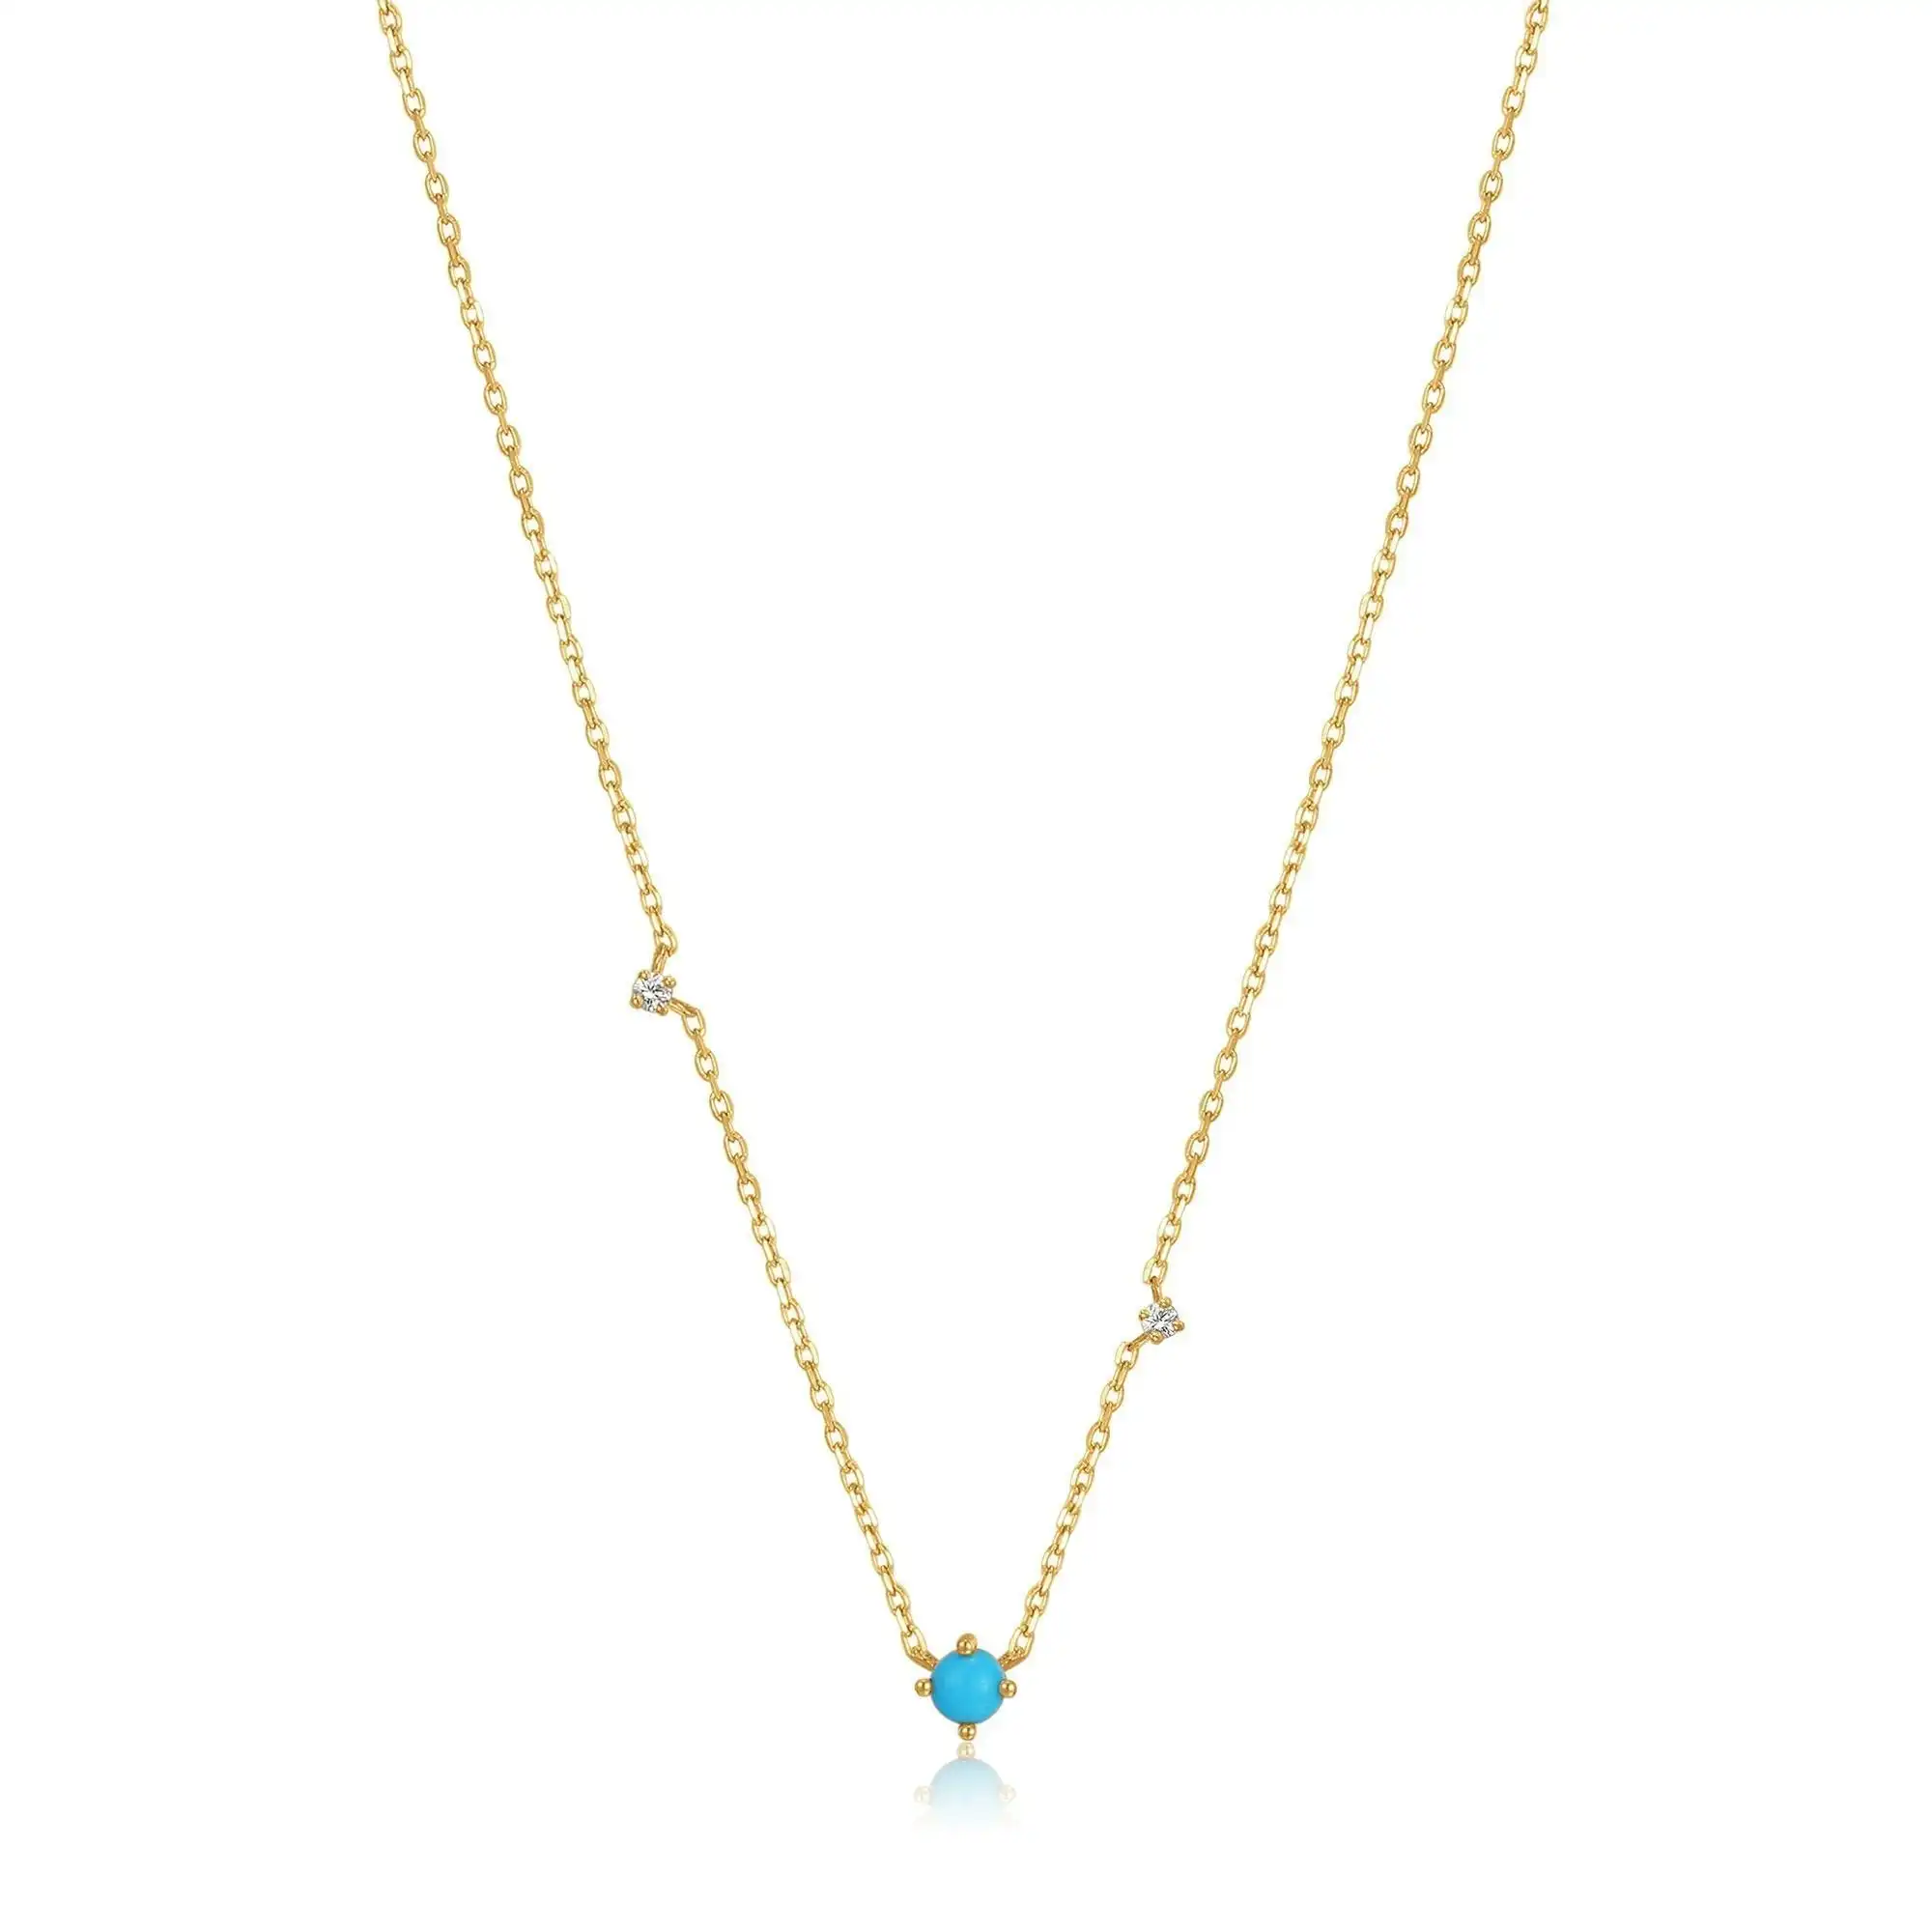 Ania Haie 14kt Gold Turquoise and White Sapphire Necklace